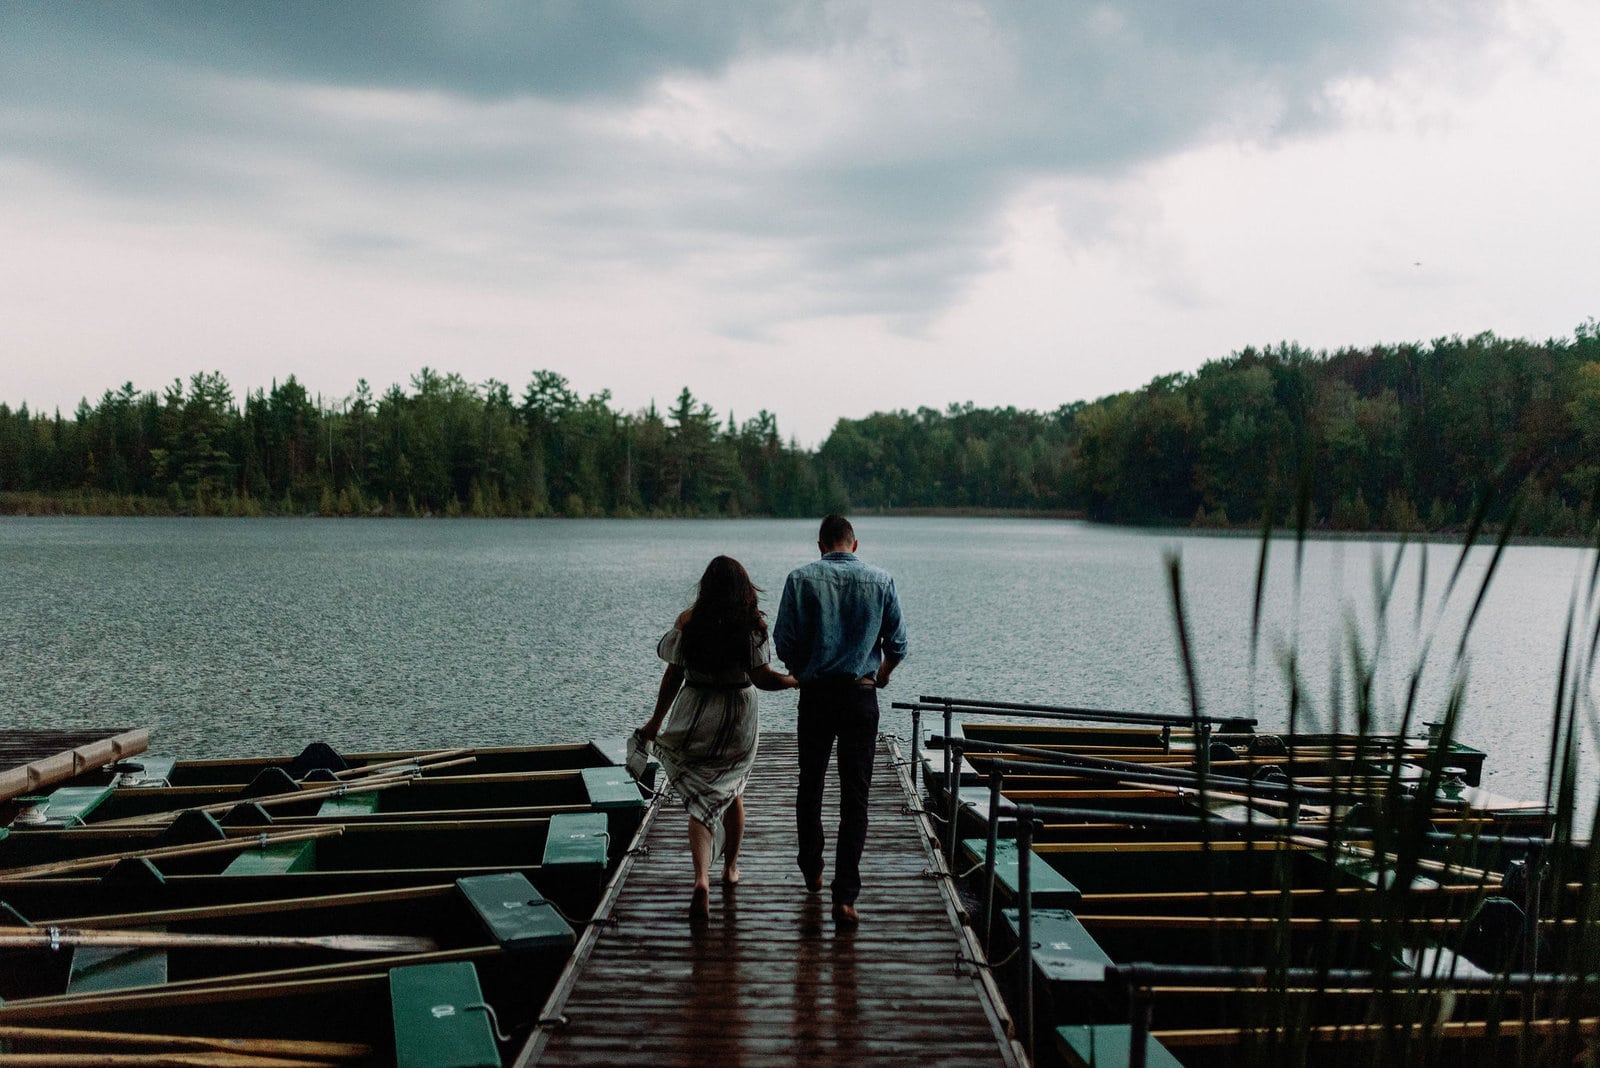 couple romantic embrace stormy engagement photos toronto jacqueline james photography rowboats the notebook storm clouds